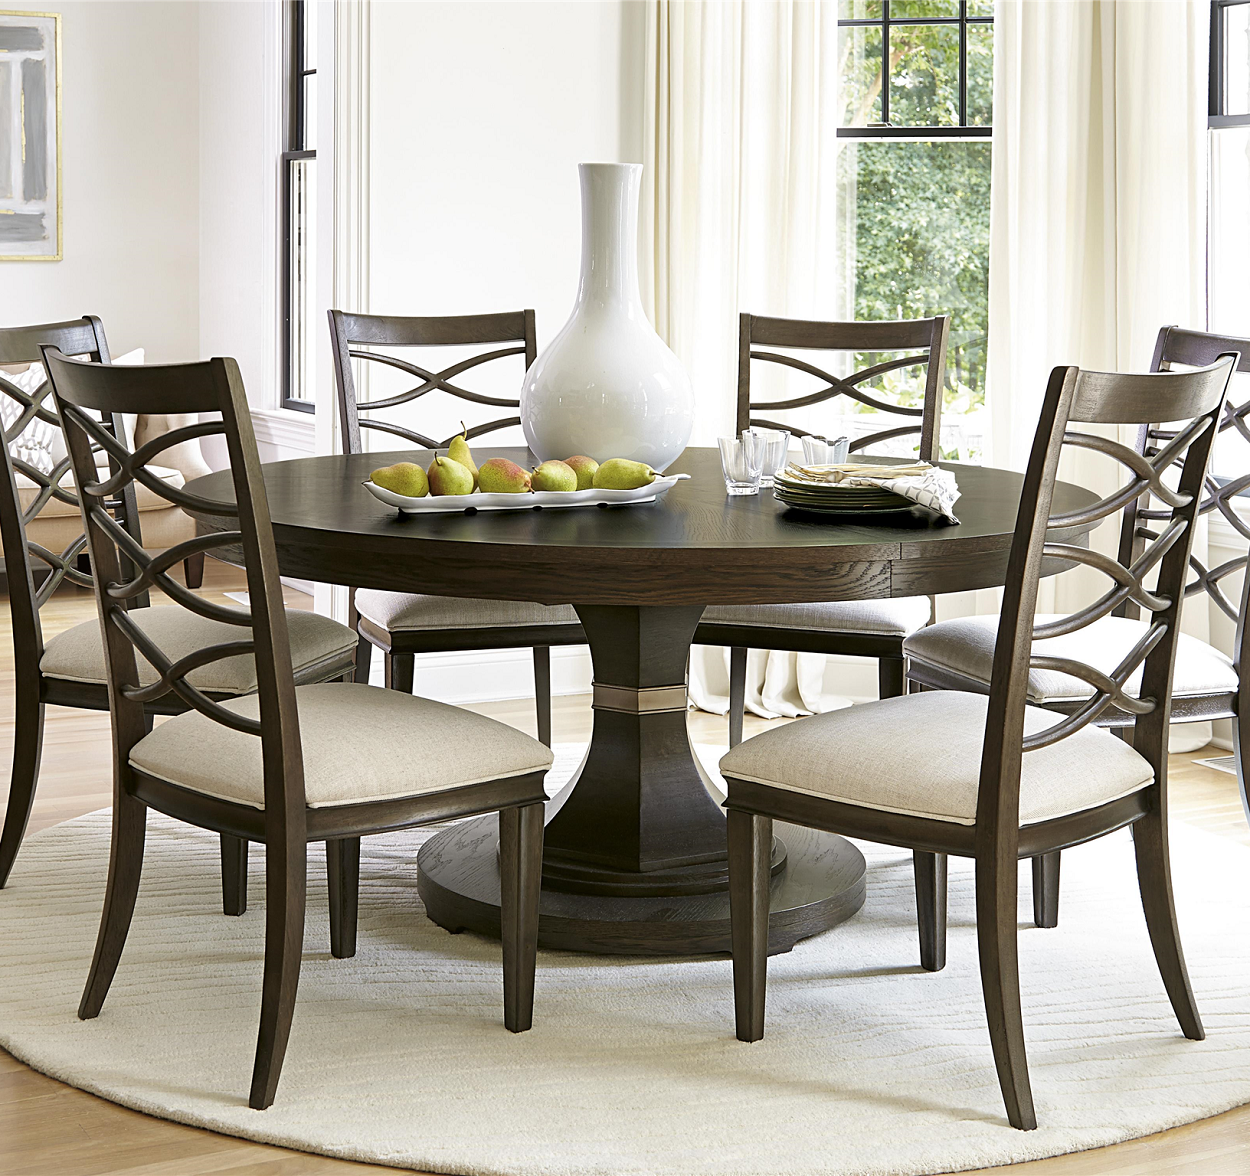  dining room tables round